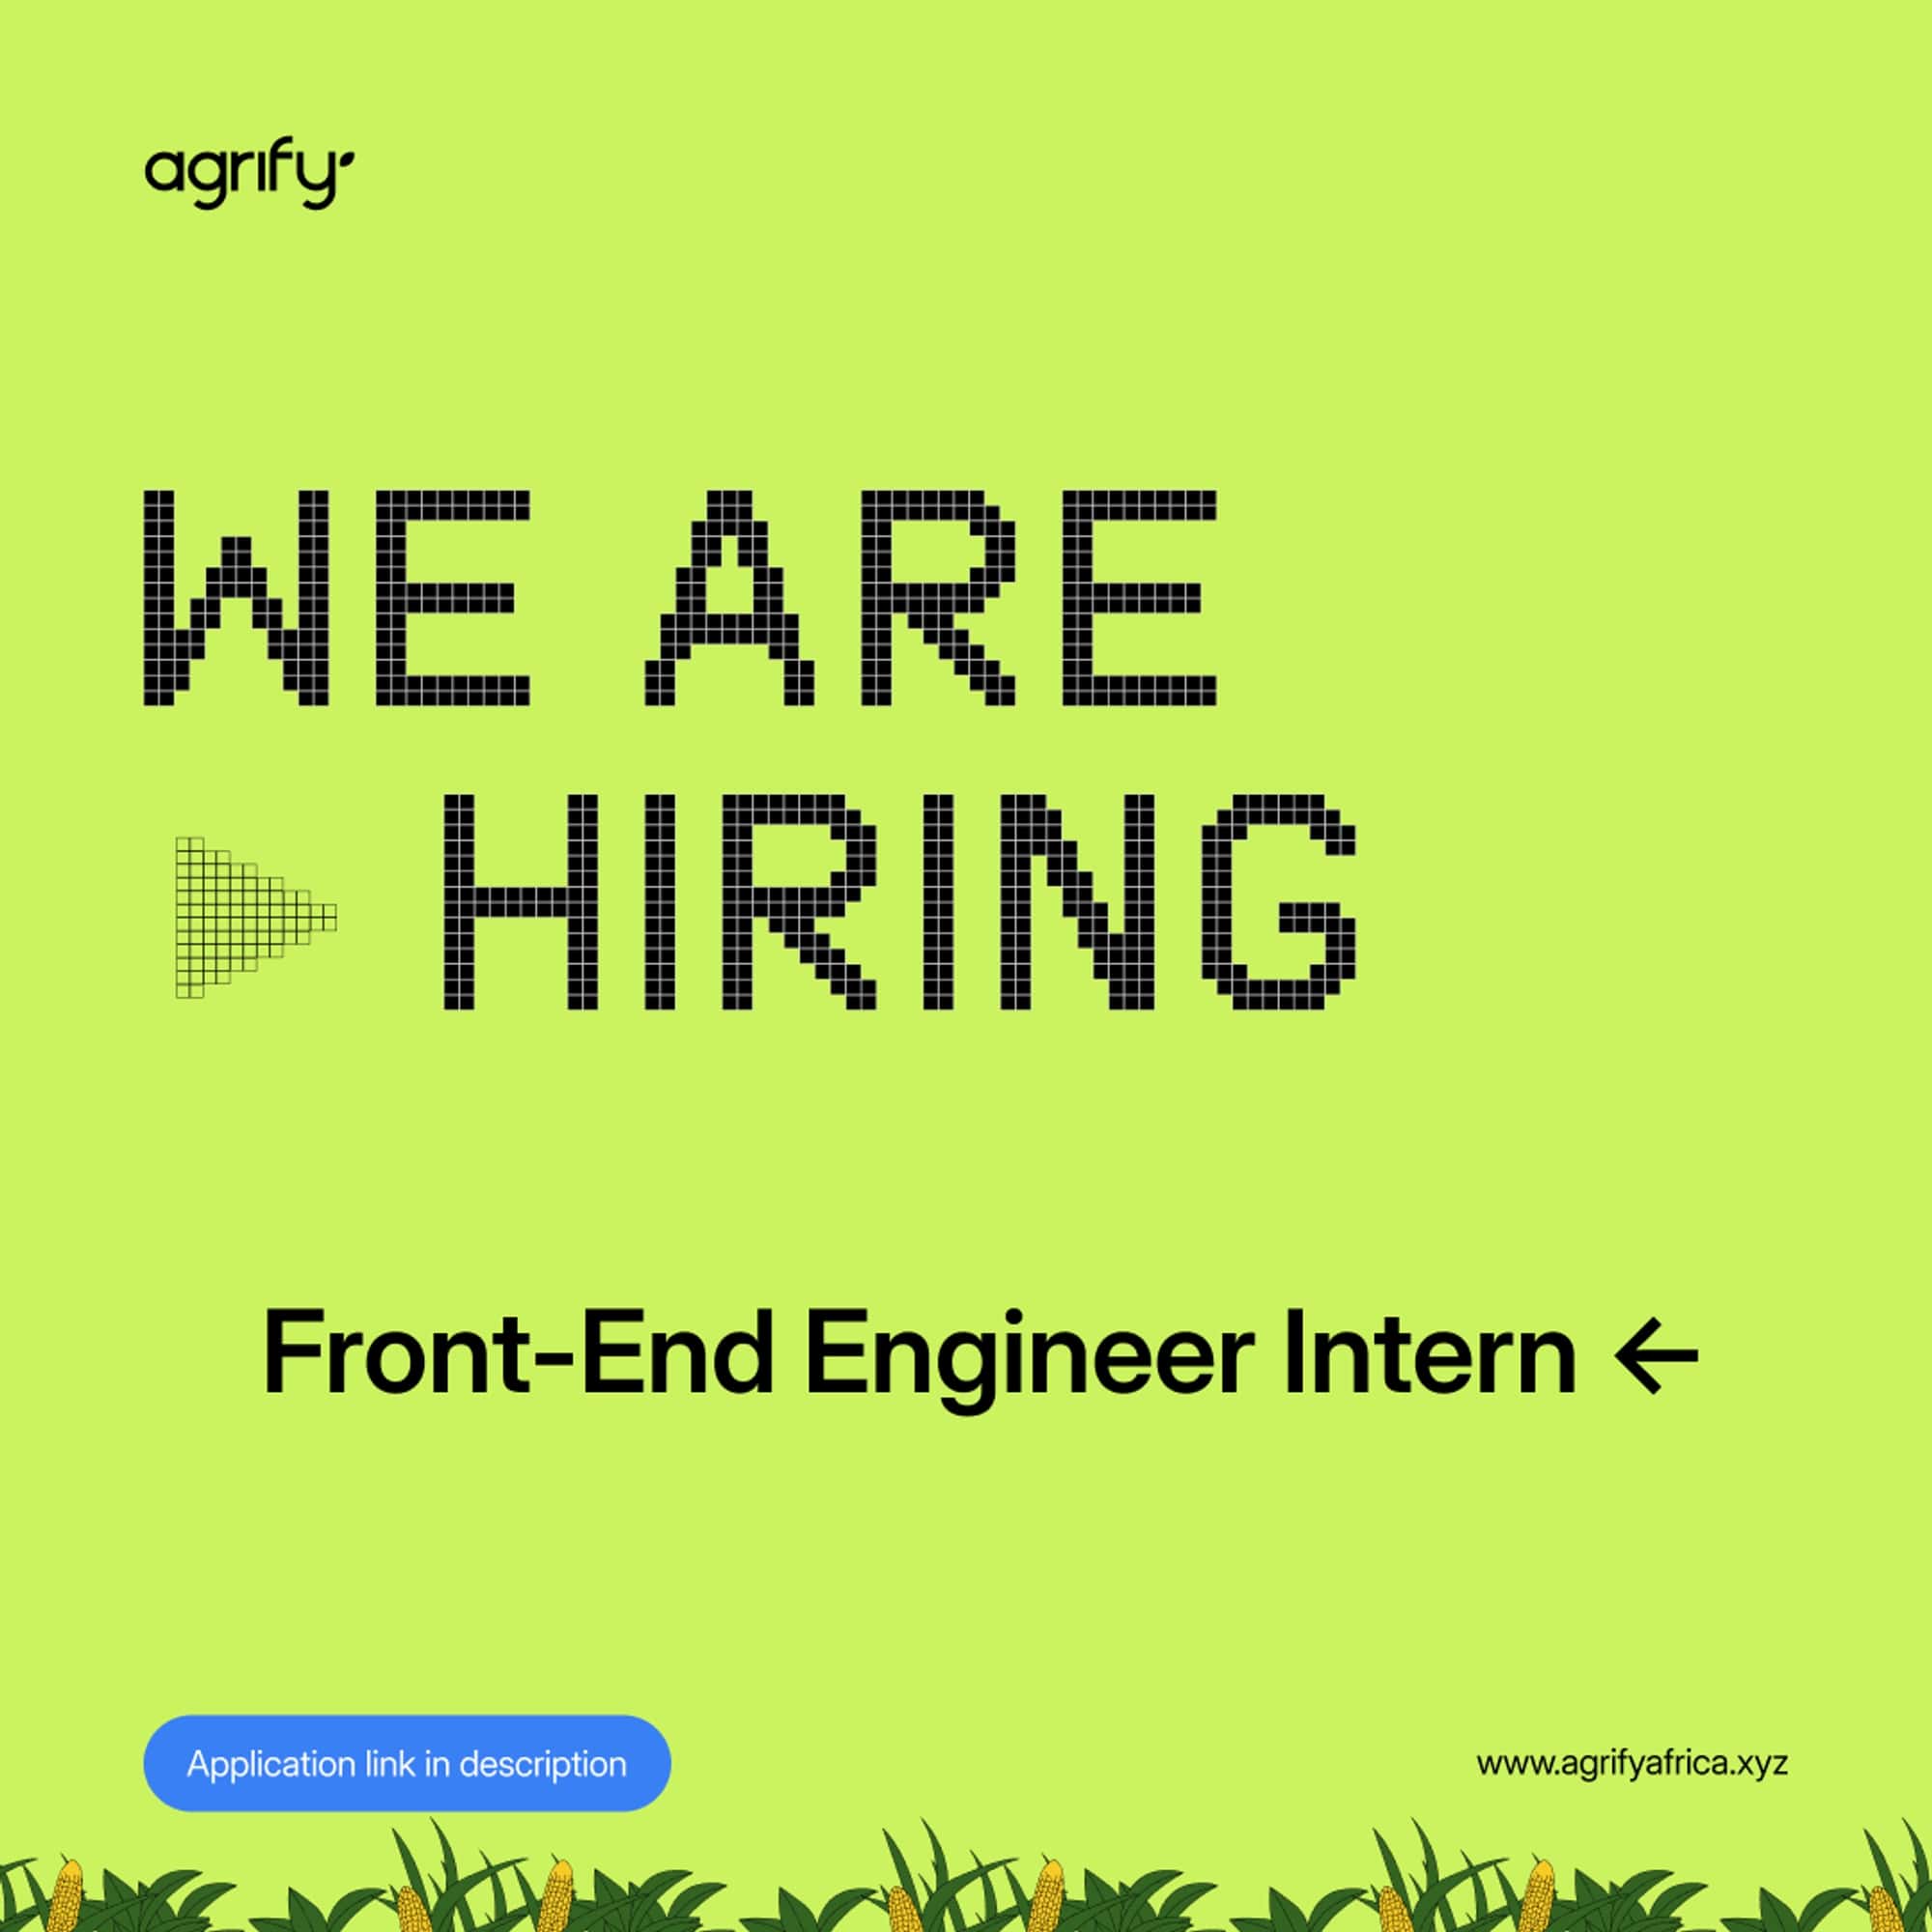 Front-End Engineering Interns Needed at Agrify (120k – 150k per month)